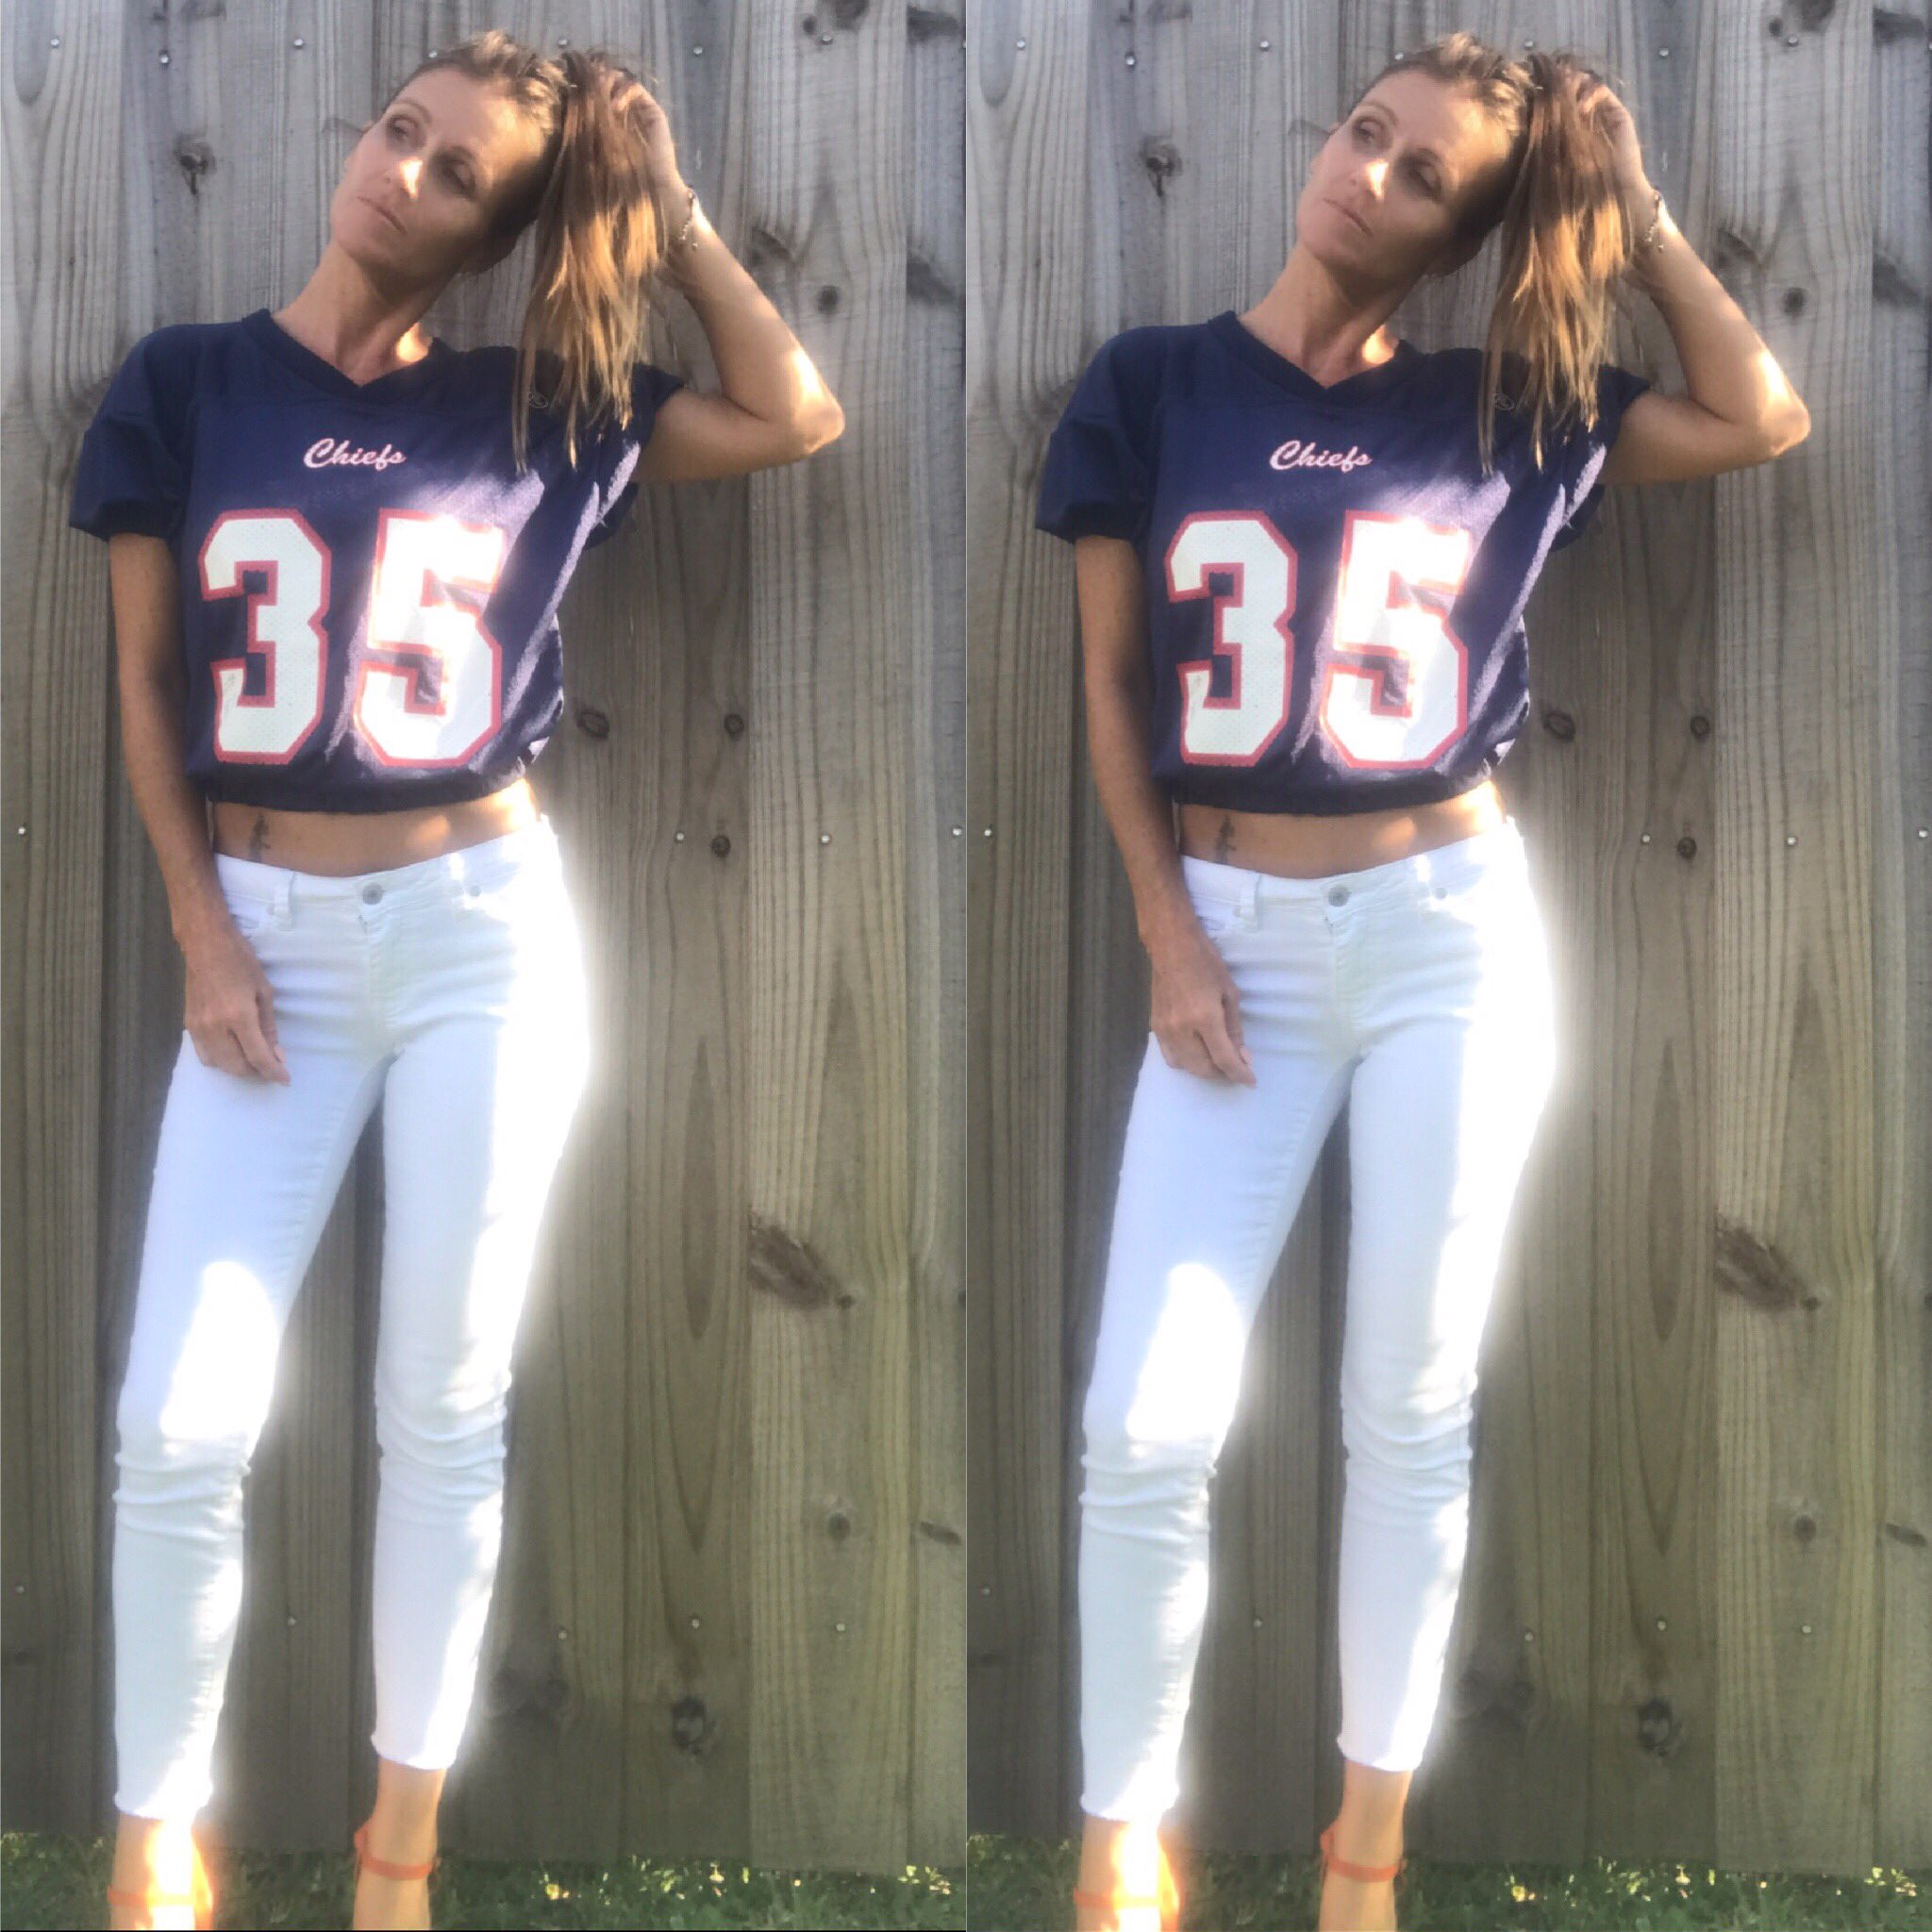 jessica mirzoyan on X: Crop Top Jerseys Available Now @sportsfashion4  #football #fashion #gameday #outfit #designer #kansascity #chiefs  #photooftheday #wtwt #myjerseyiscoolerthanyours  / X